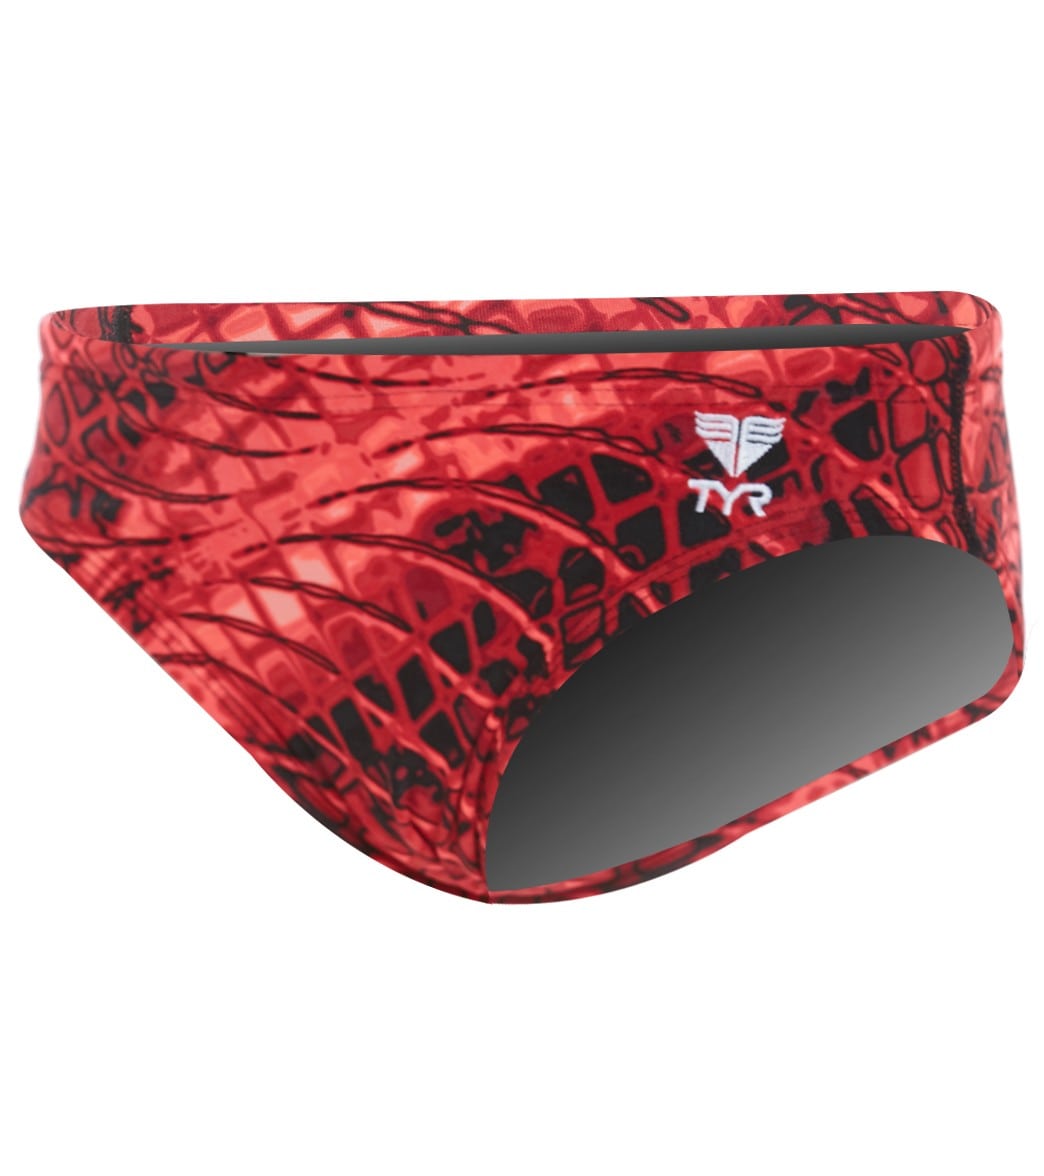 TYR Boys' Plexus Allover Racer Brief Swimsuit - Red 22 Polyester/Spandex - Swimoutlet.com